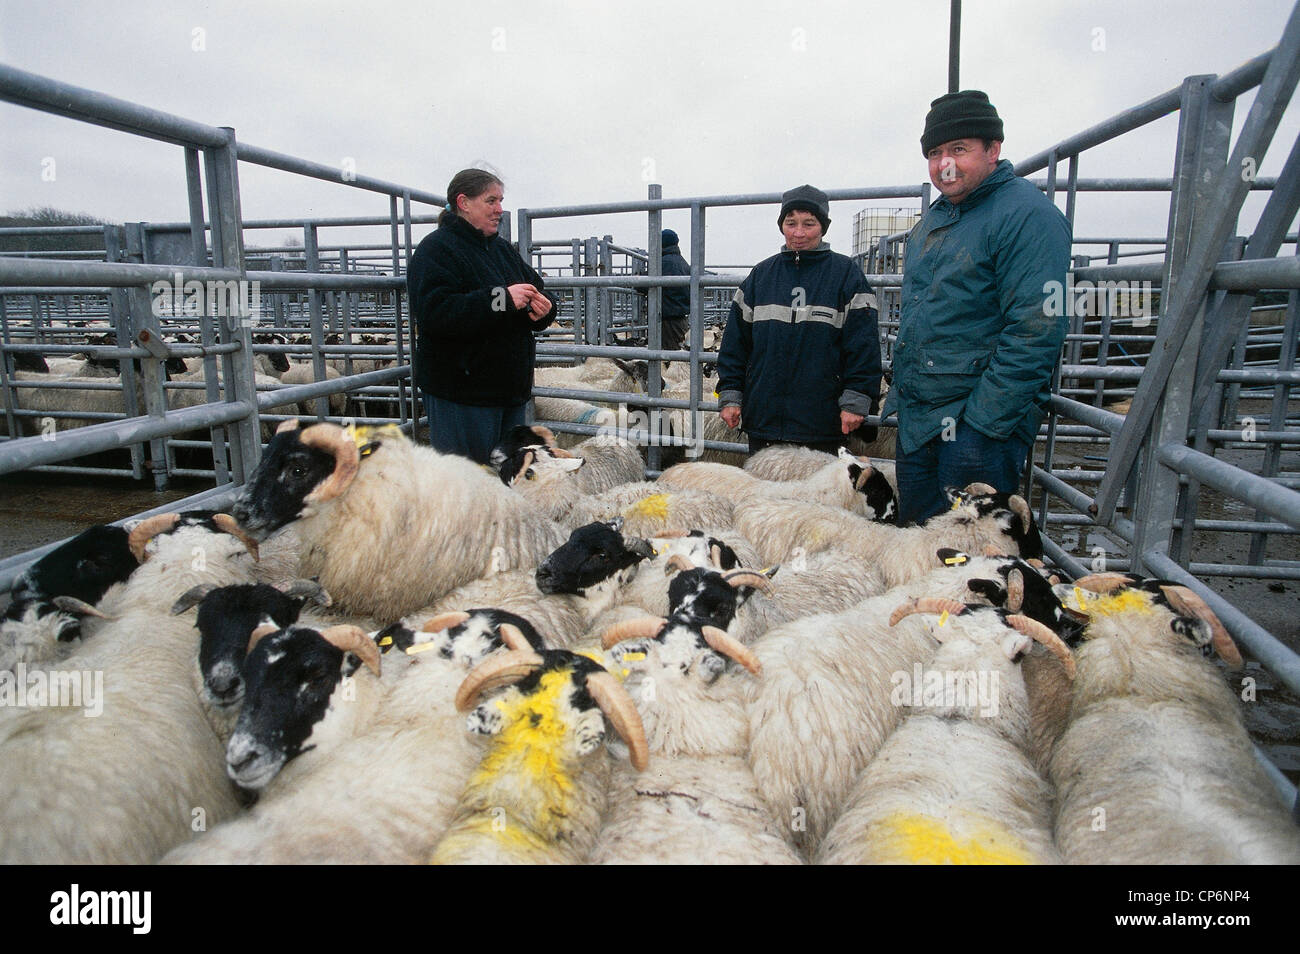 United Kingdom - Scotland - Argyll Islay. Auction of sheep, a flock of sheep in the pen. Stock Photo